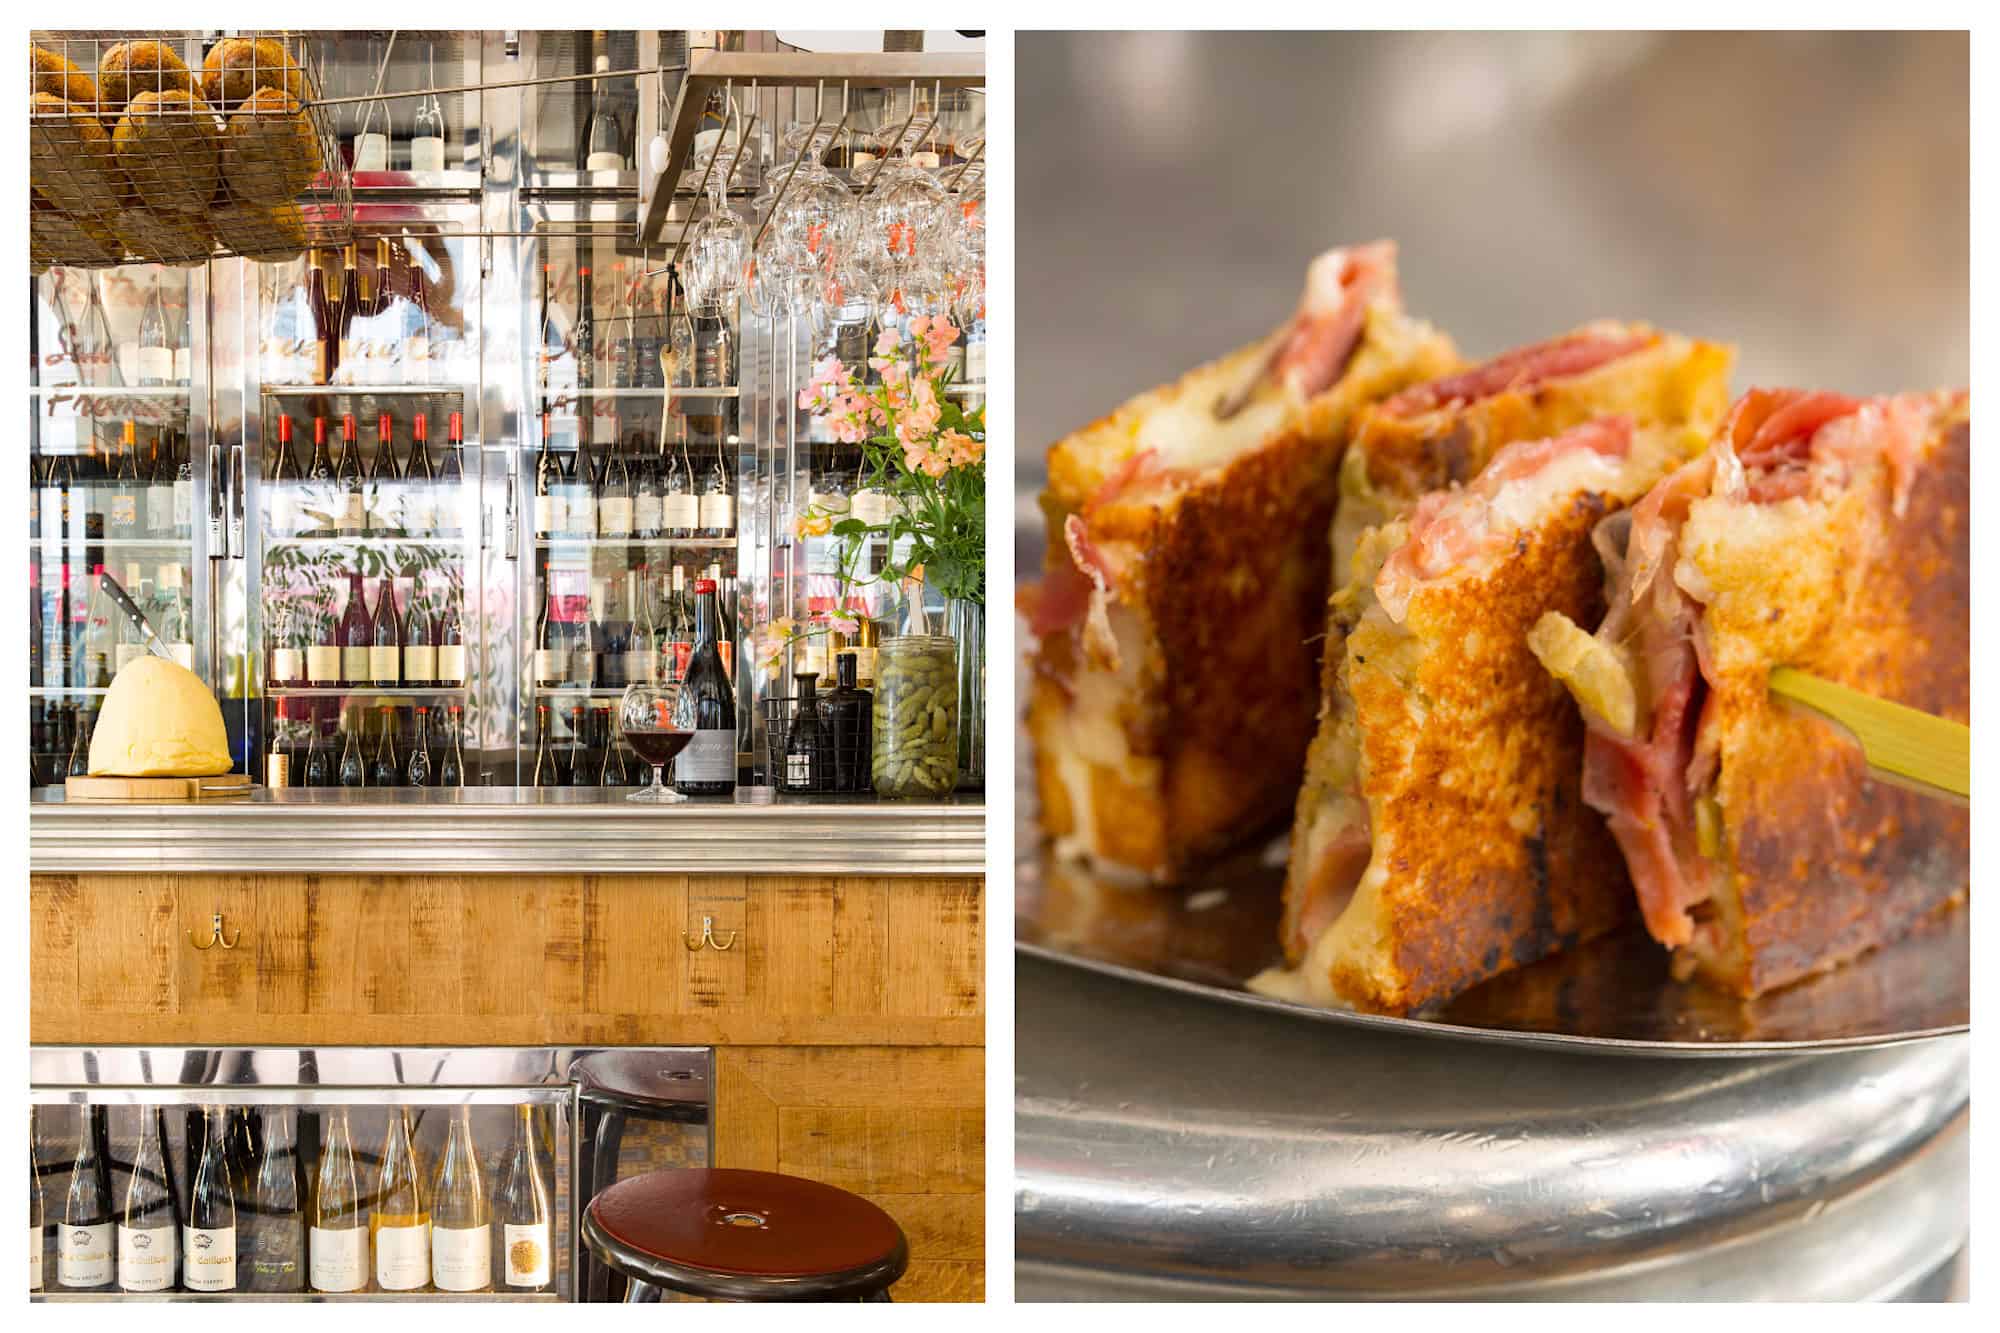 L'avant Comptoir du Marché does great small plates in Paris and has an impressive wine collection (left) and tasty tapas-like bites for pre-dinner drinks (right).